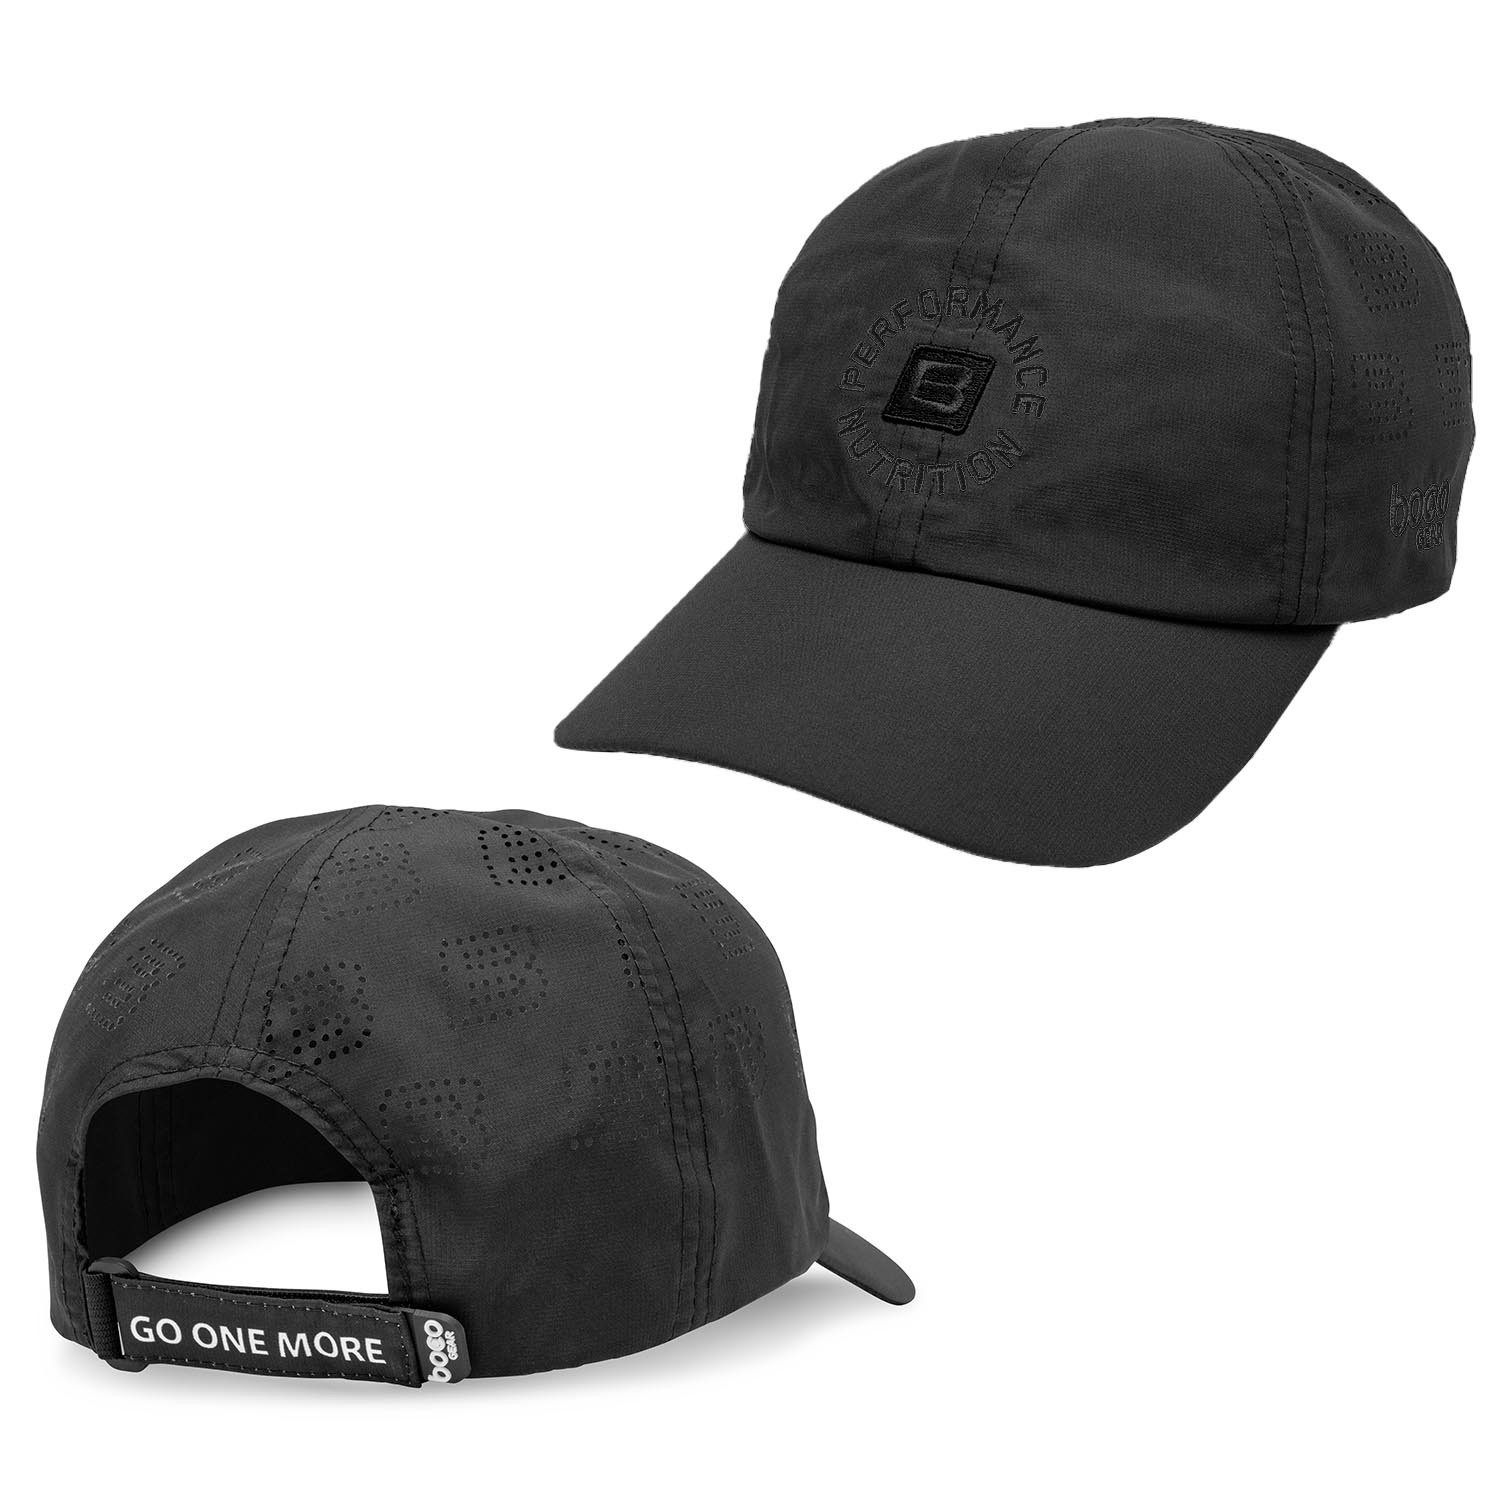 Bare Performance Nutrition Limited Edition Endurance Hat (Black On Black) – Clothing – A-list Nutrition